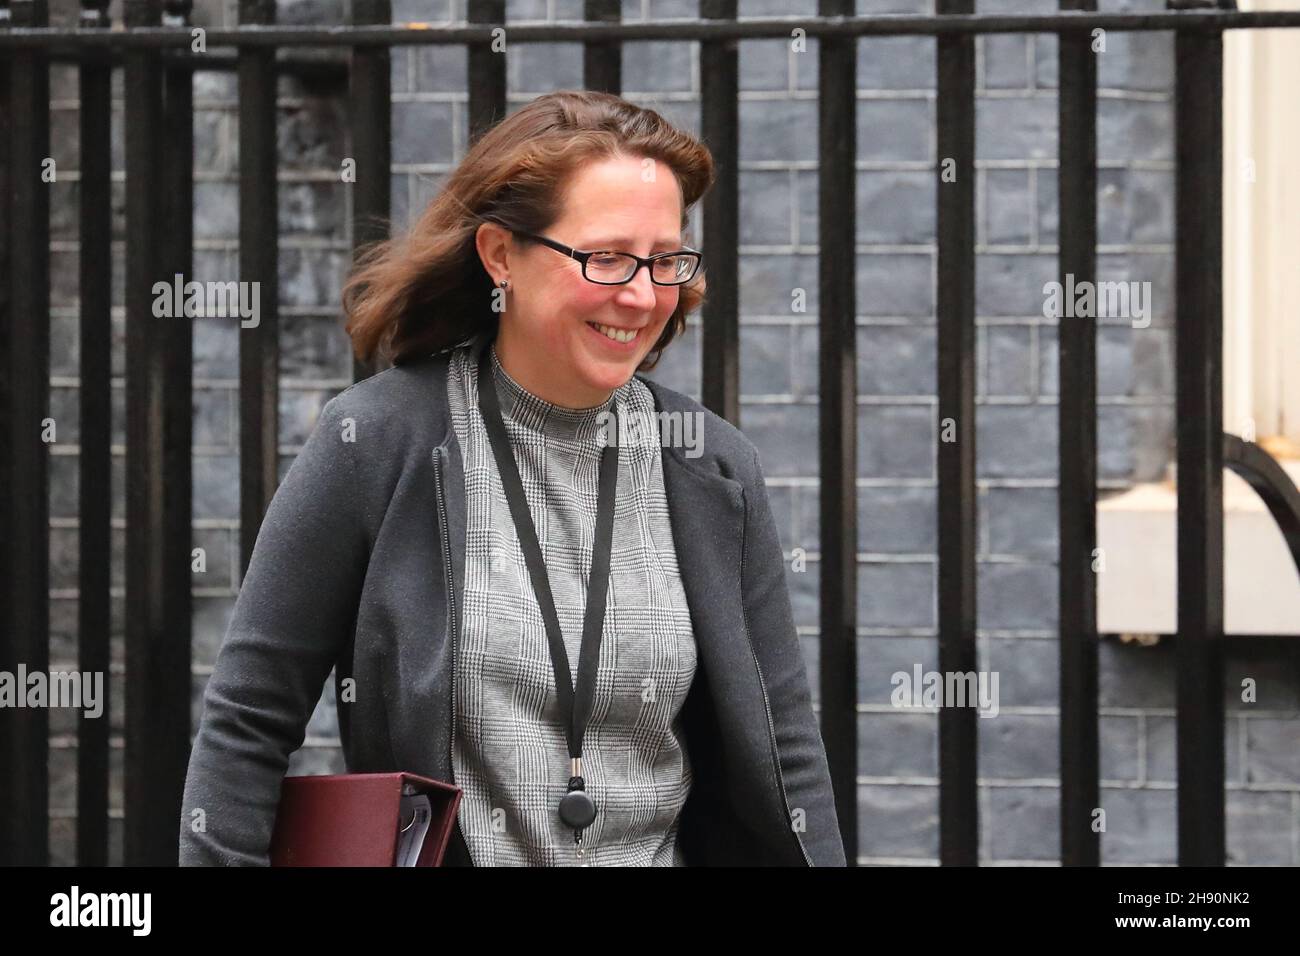 London, UK, 30th November 2021. Smiling Leader of the House of Lords Baroness Evans of Bowes Park leaving Downing Street after the weekly Cabinet Meeting. Stock Photo